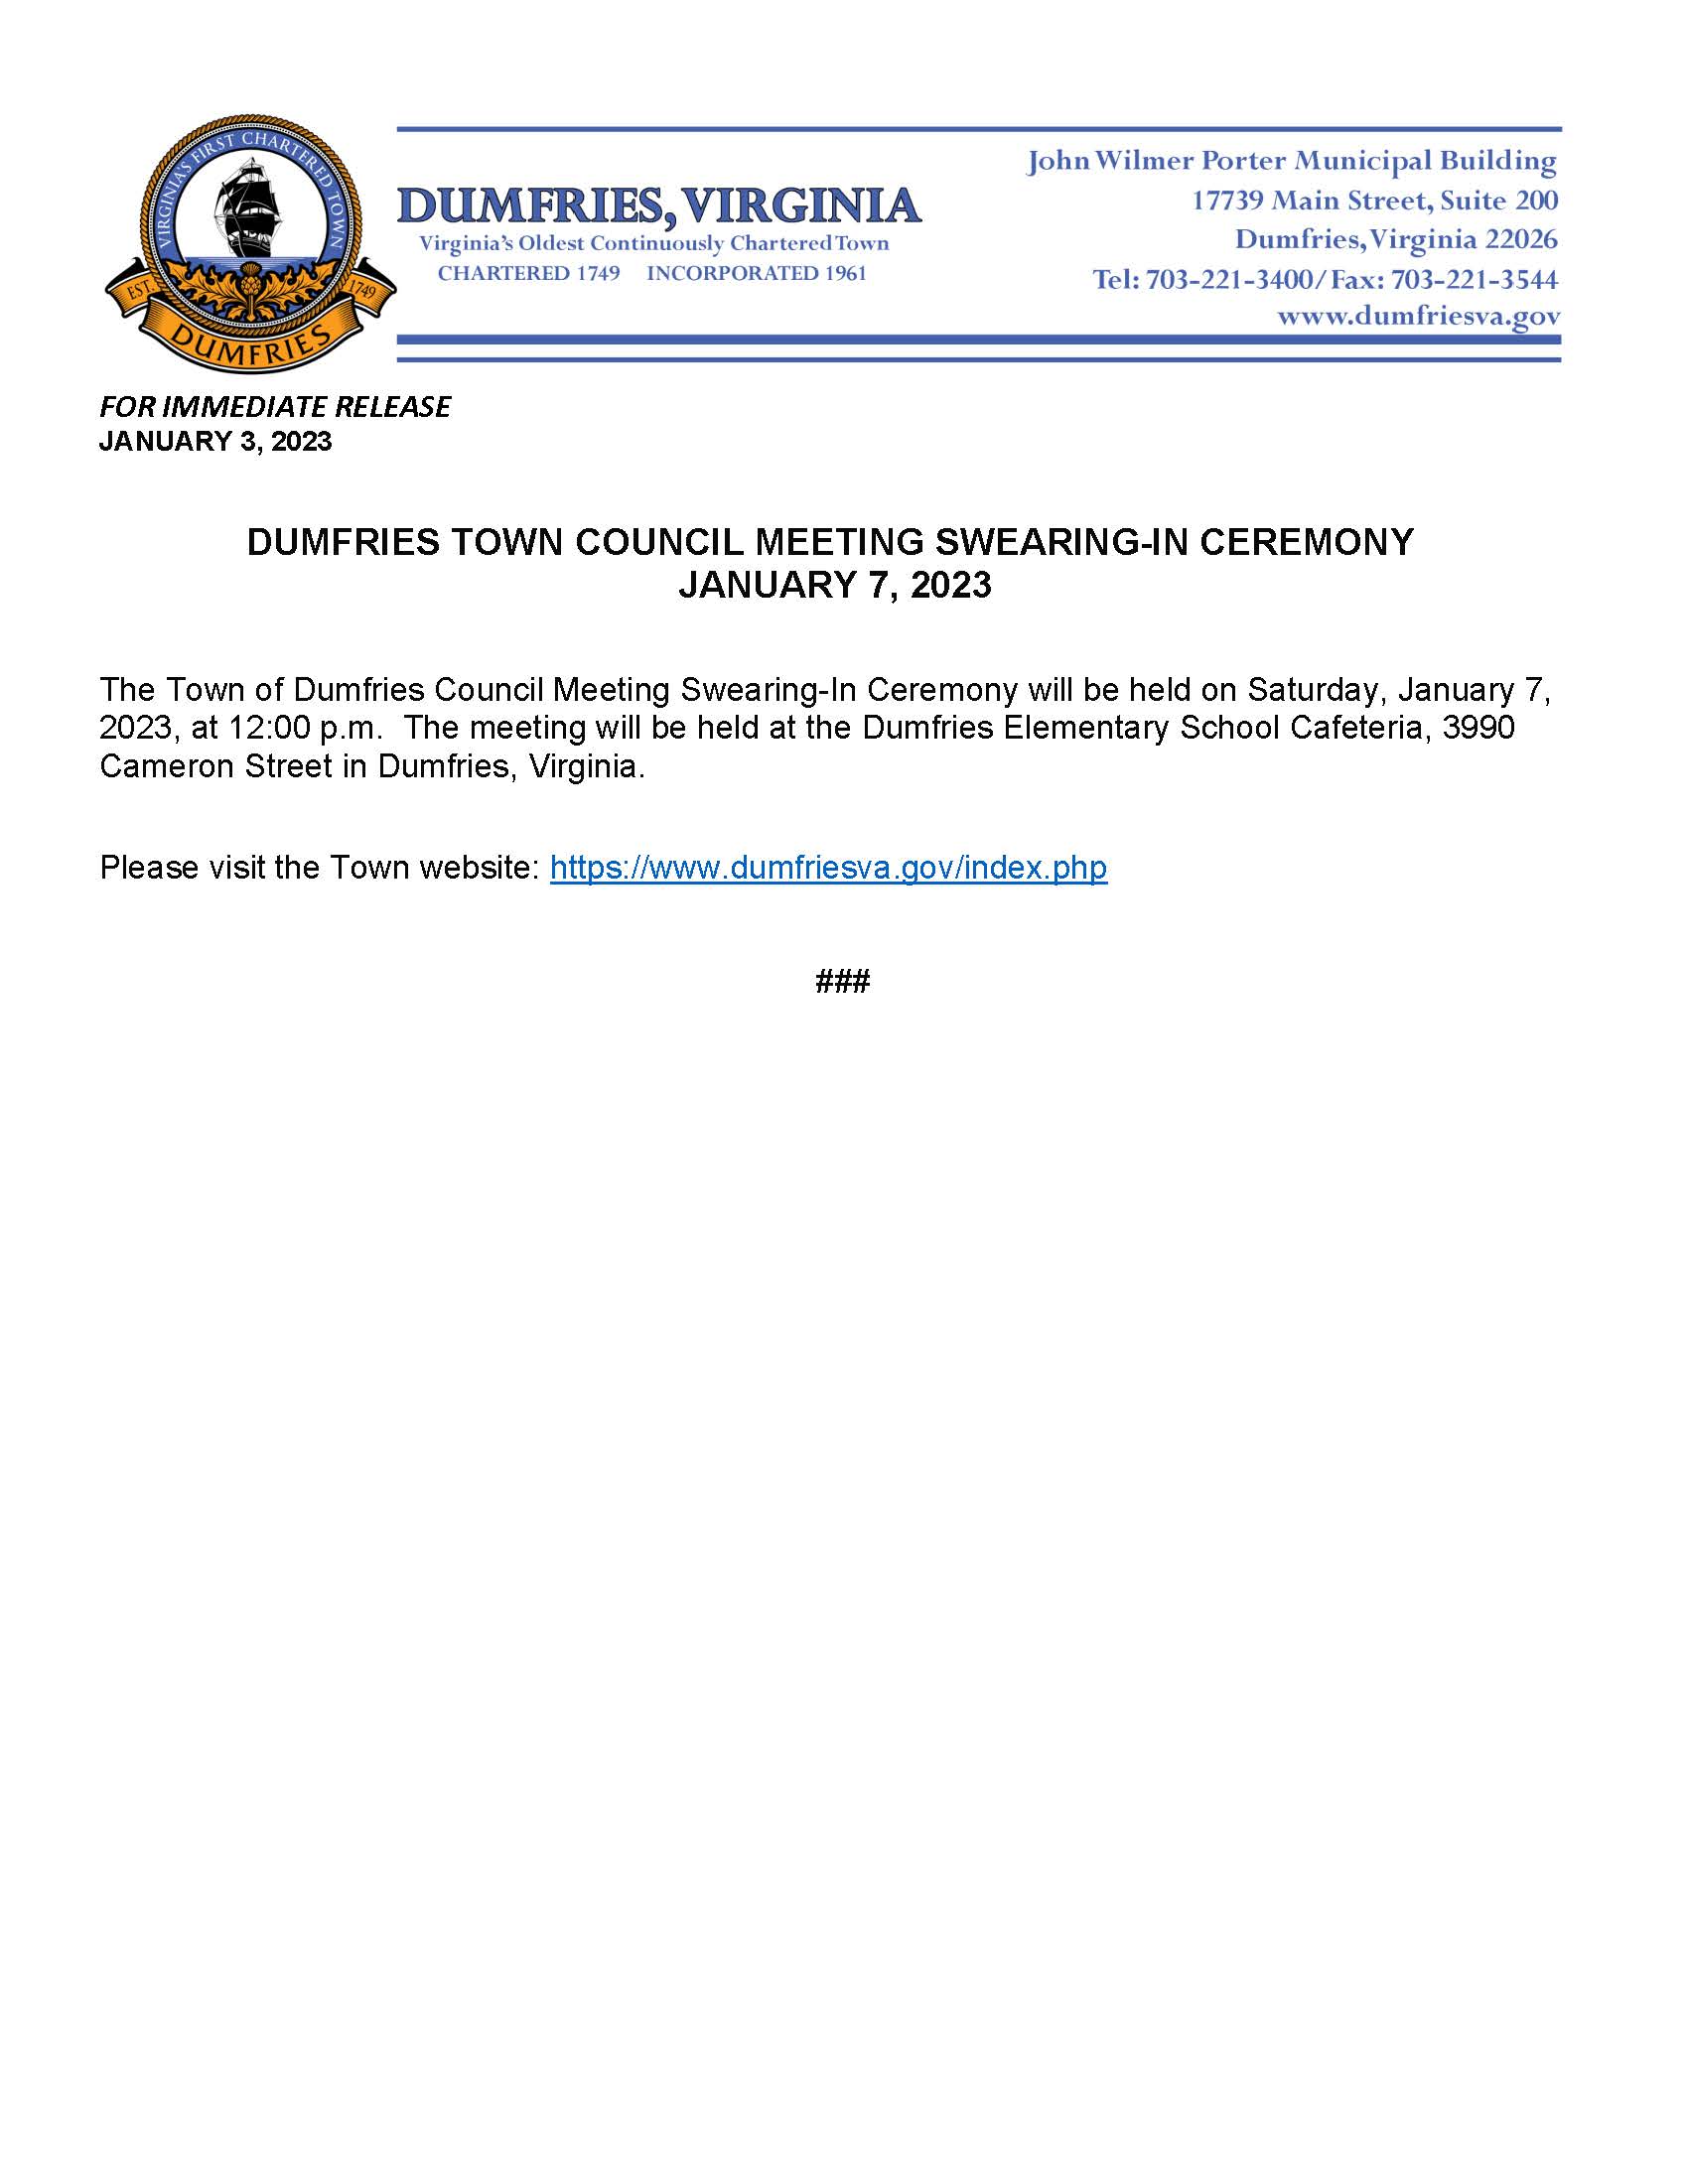 Town Council Meeting Swearing-In Ceremony